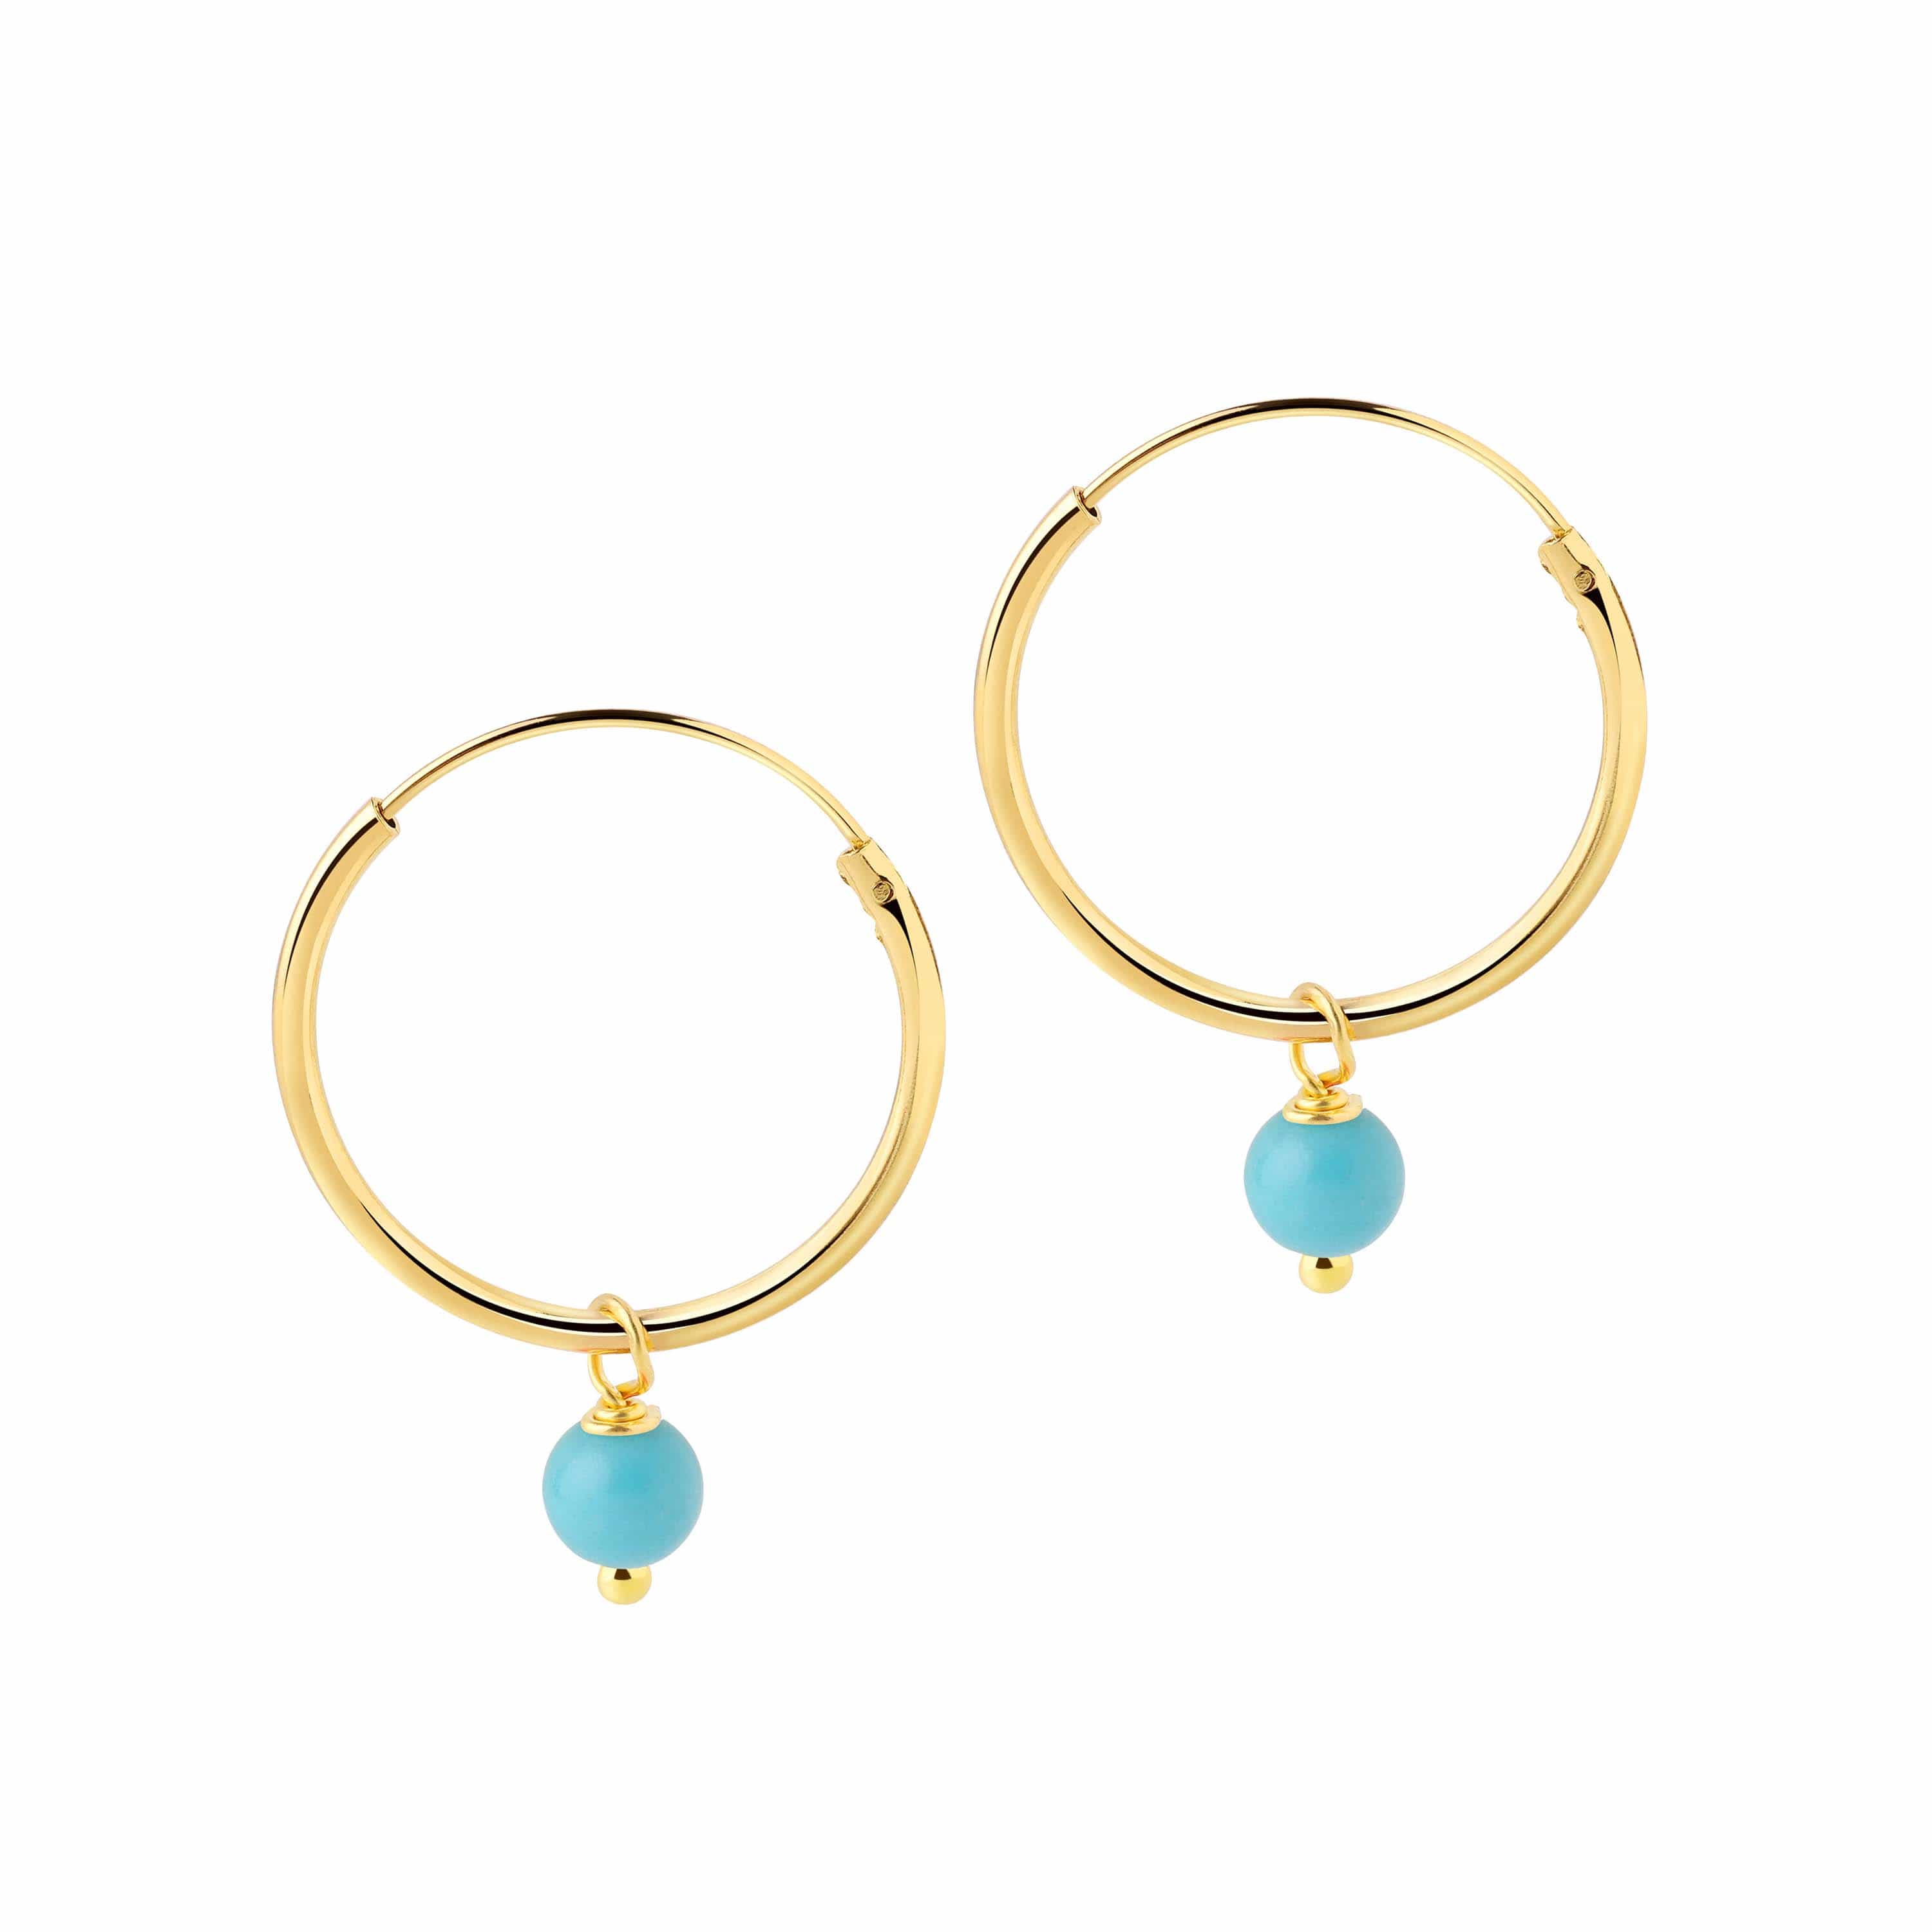 Small Silver Hoop Earrings Turquoise Blue Stone